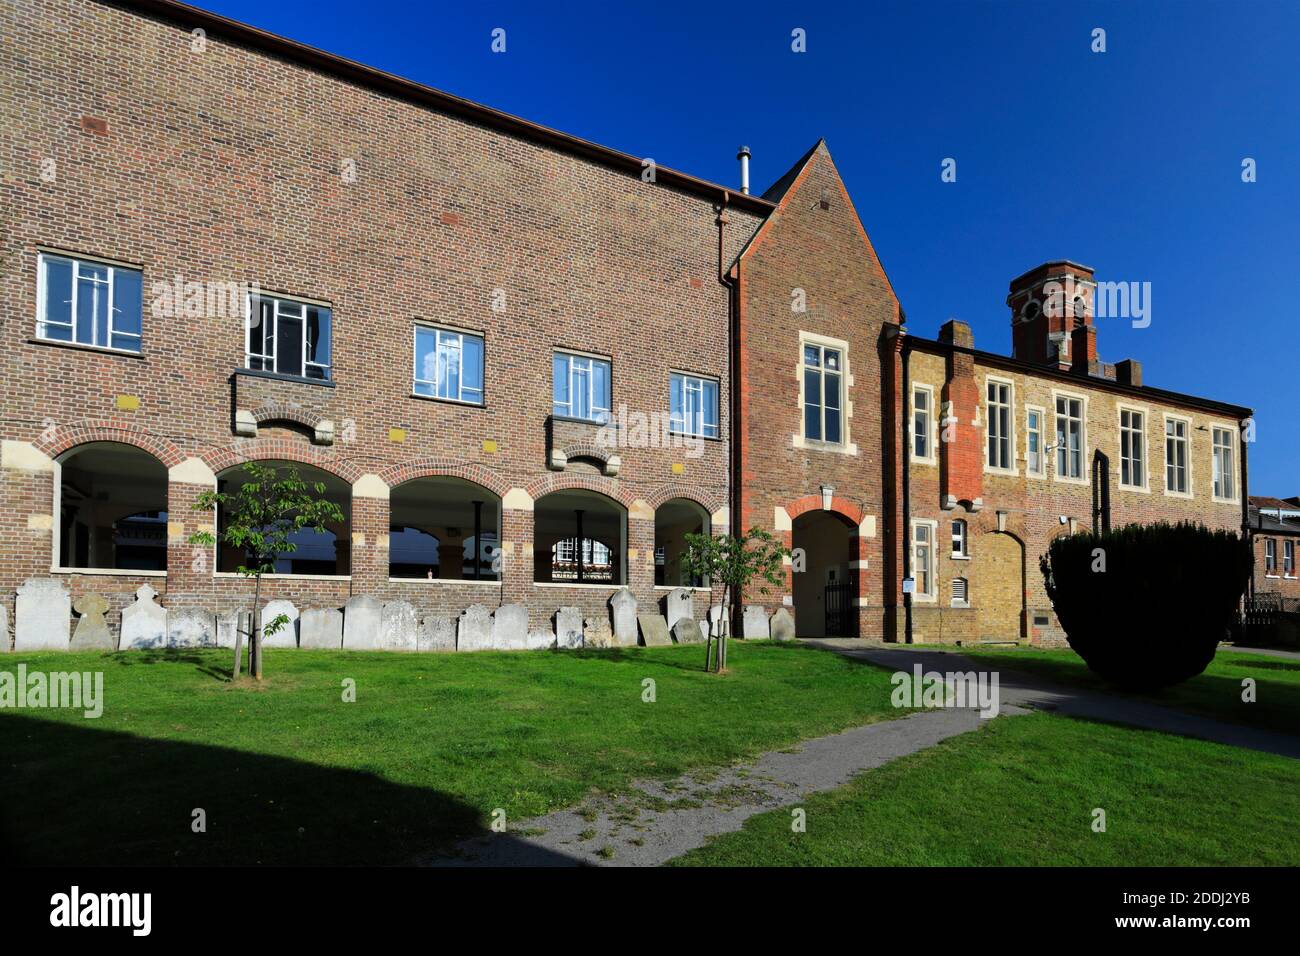 The Old Town Hall, Hemel Hempstead Old town, Hertfordshire County, England Stock Photo